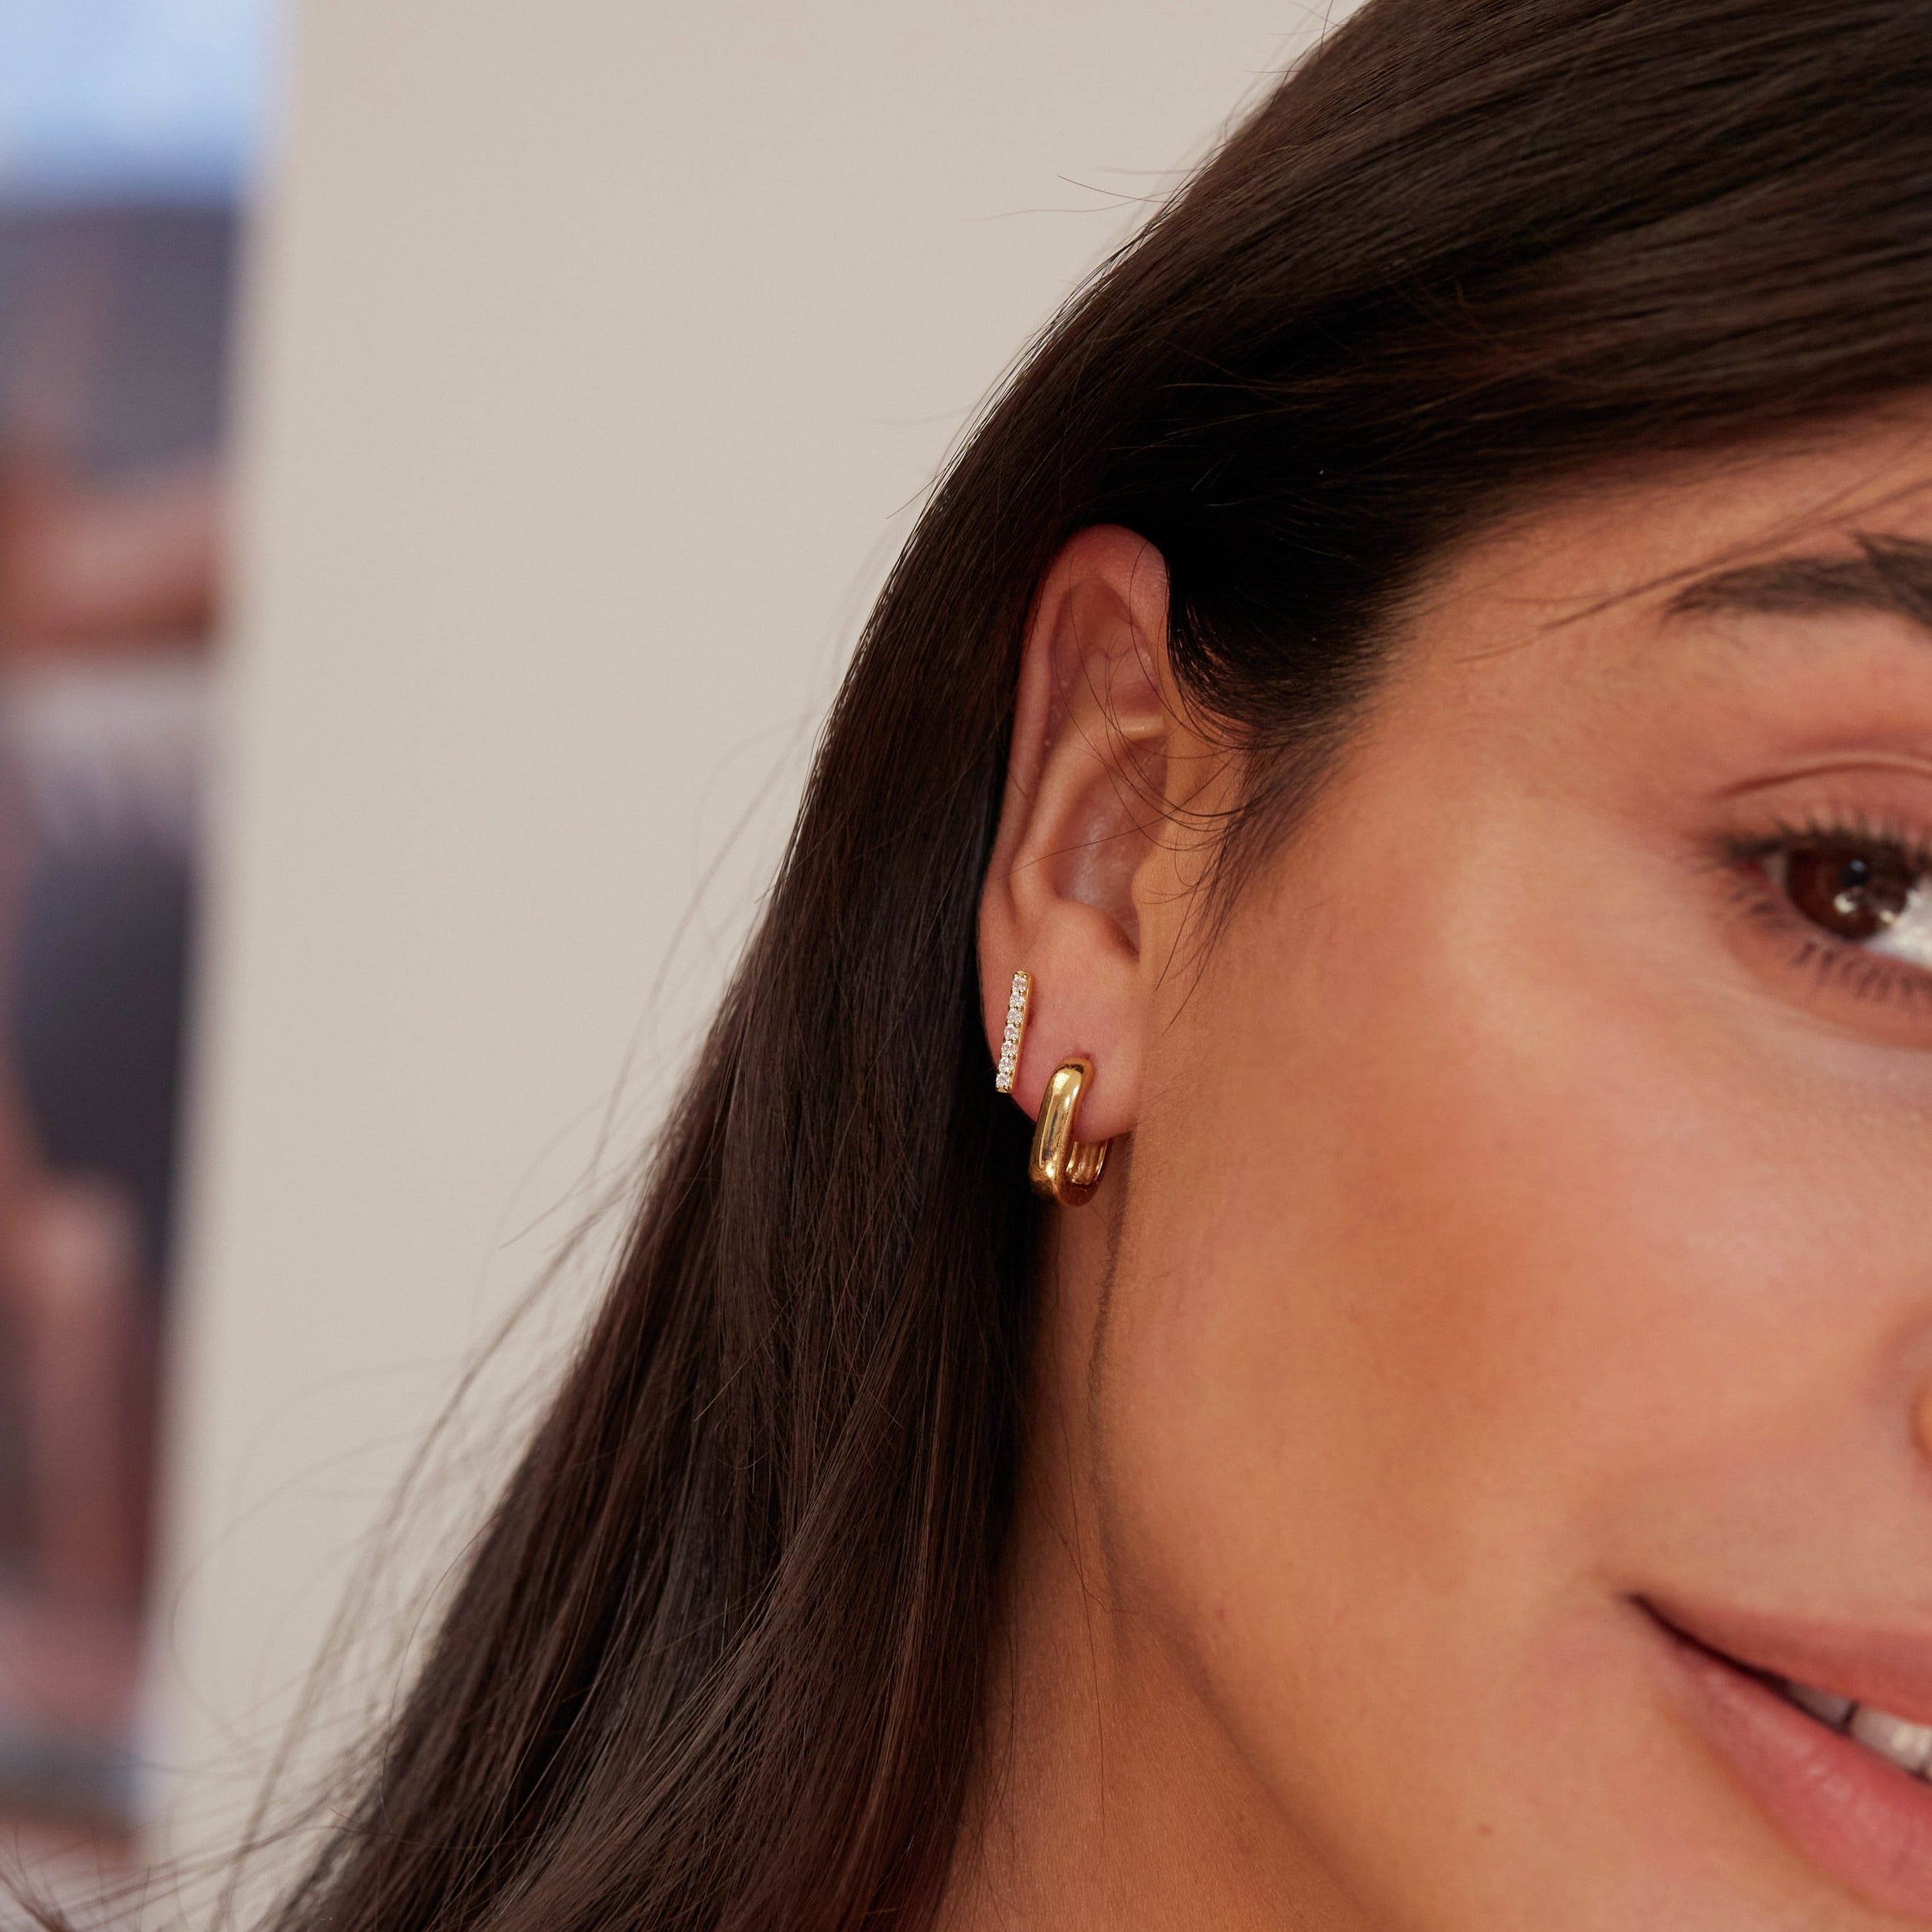 Gold thick squared hoop earring paired with a diamond earring in one ear lobe of a brunette woman 